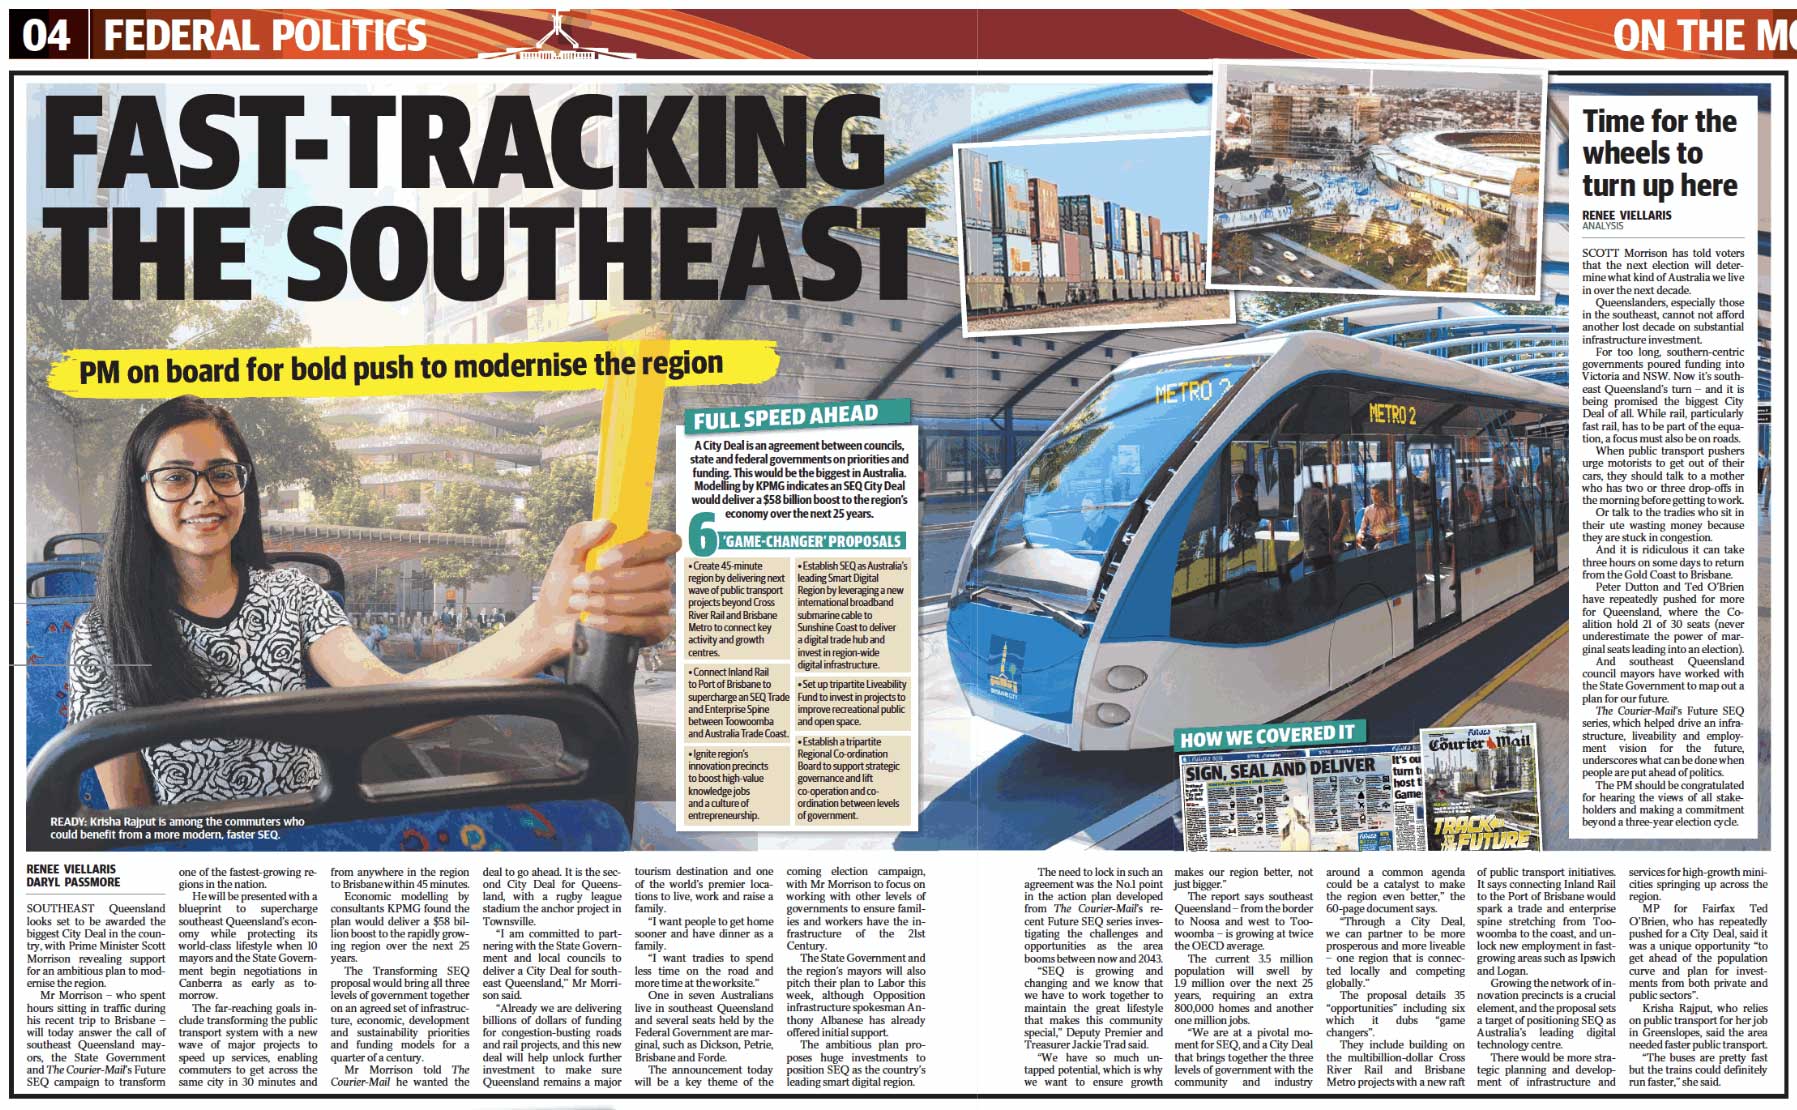 Brisbane & Surrounds on Fast-track to Growth